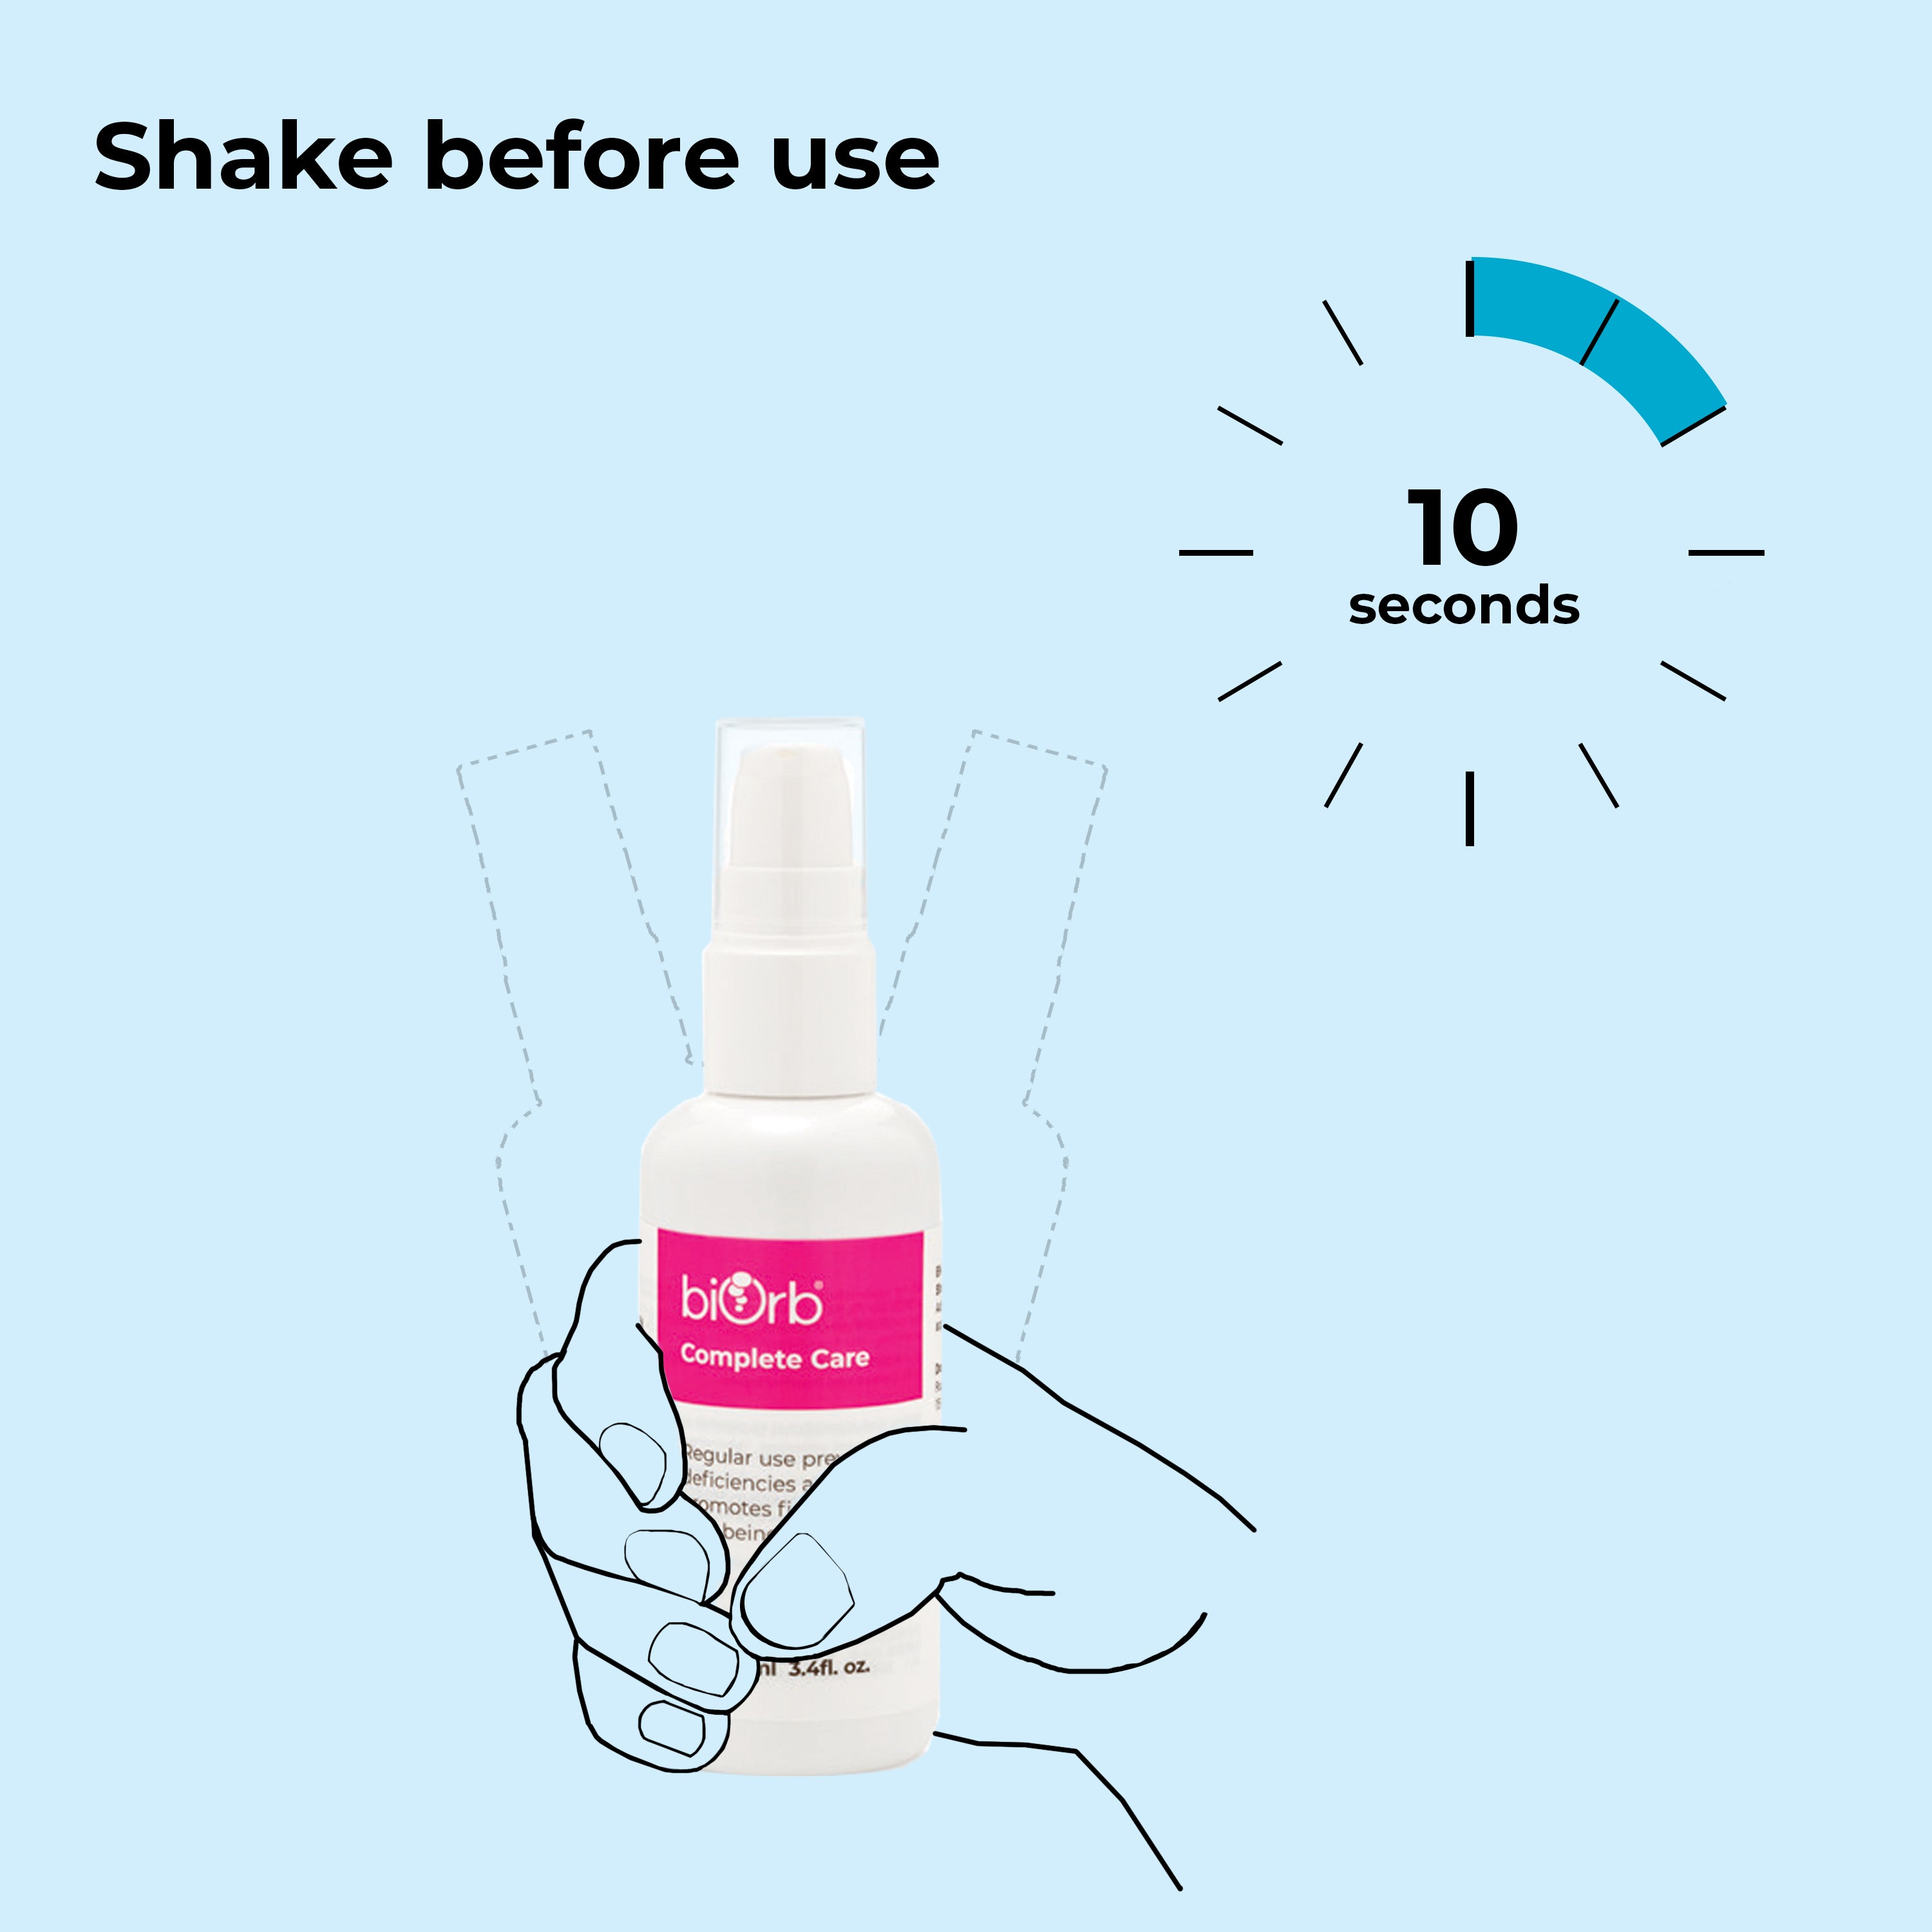 Complete Care - Shake before use